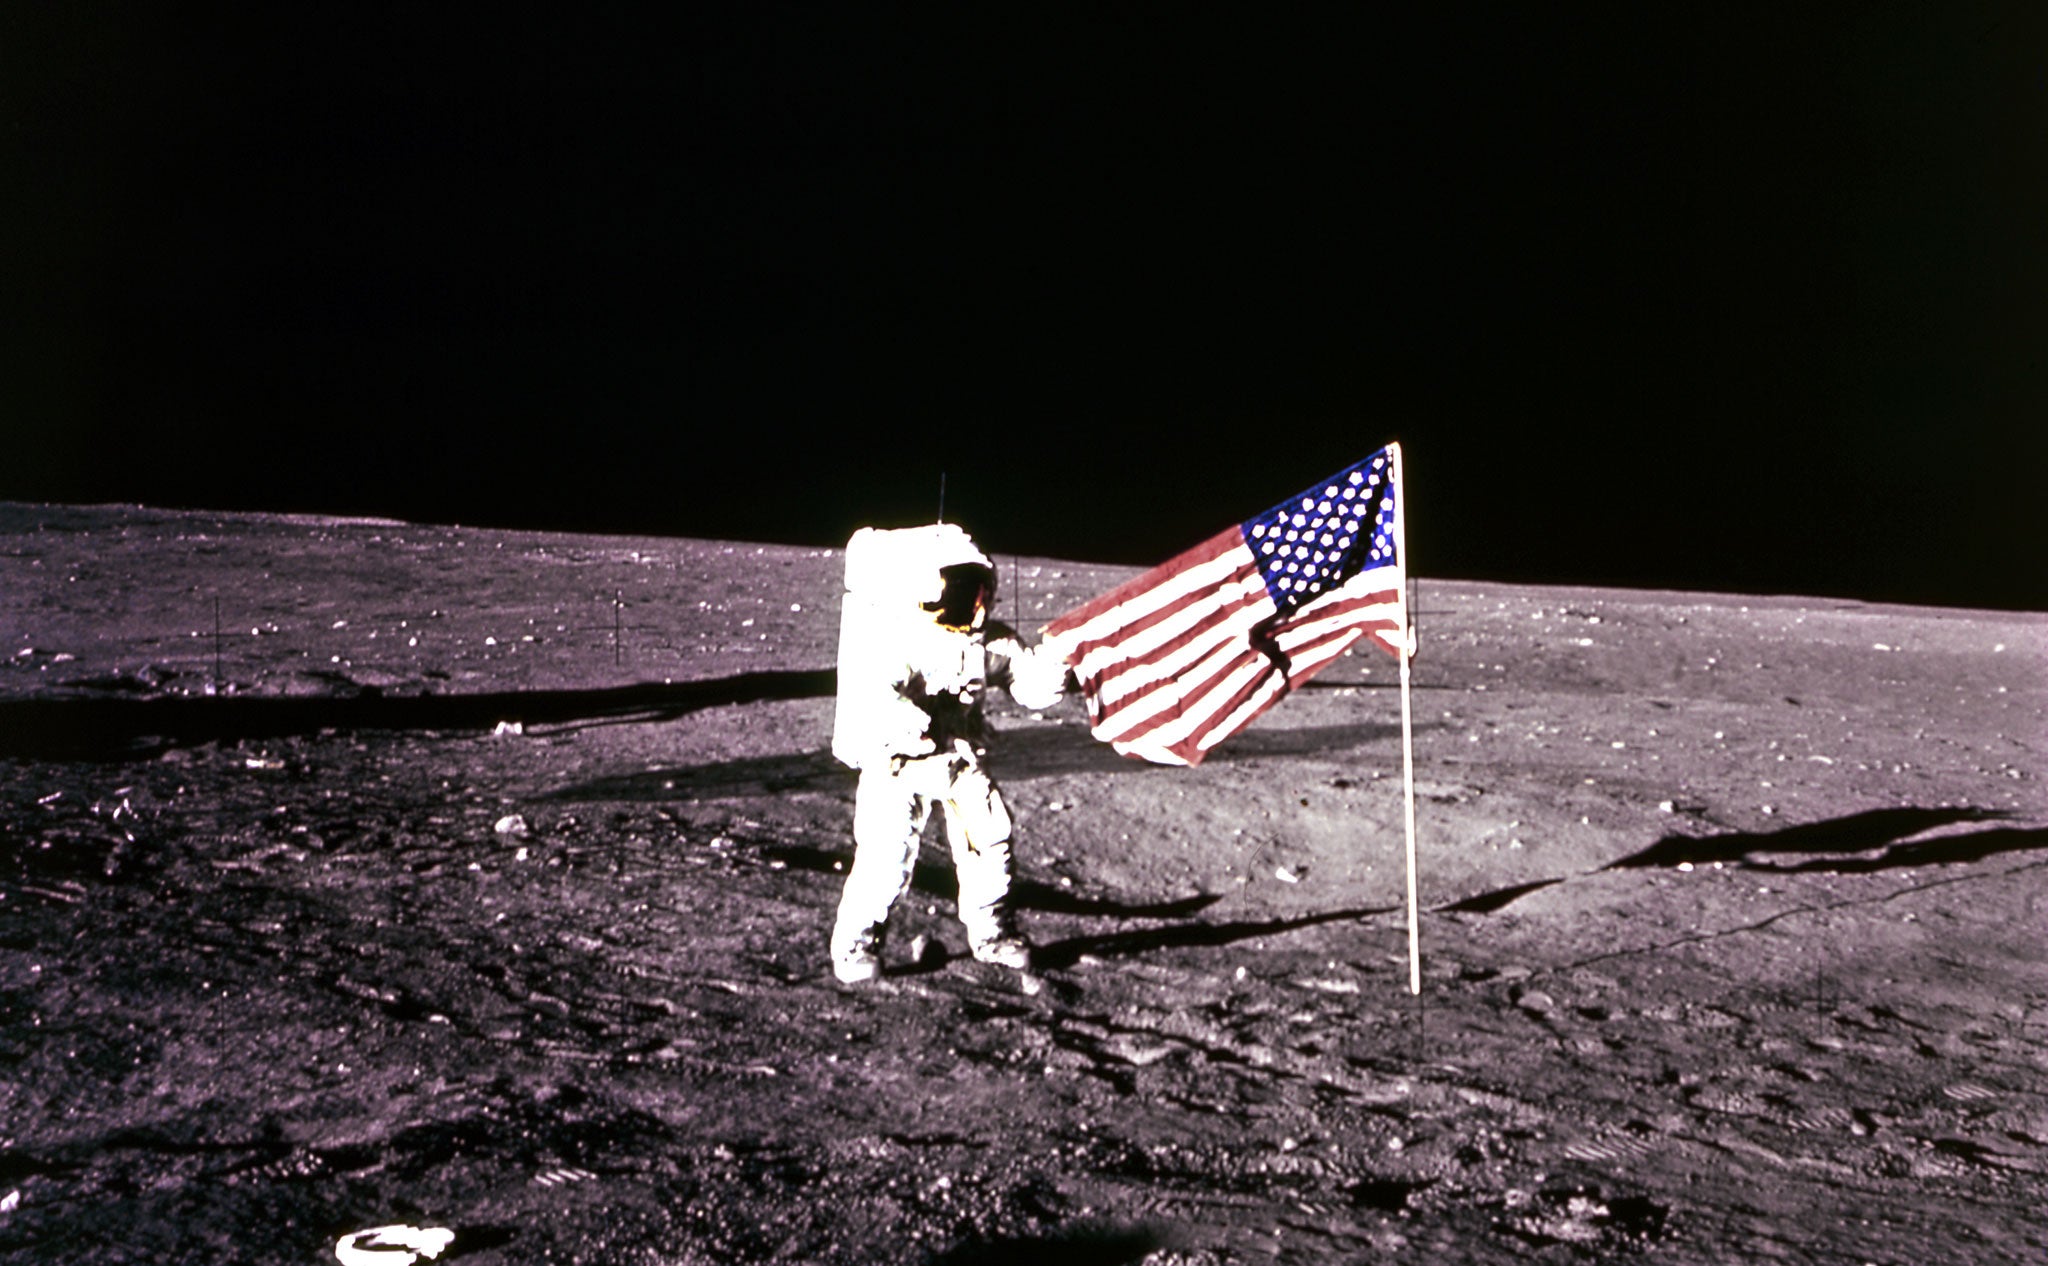 Apollo 12 astronaut Pete Conrad on what could soon be American soil